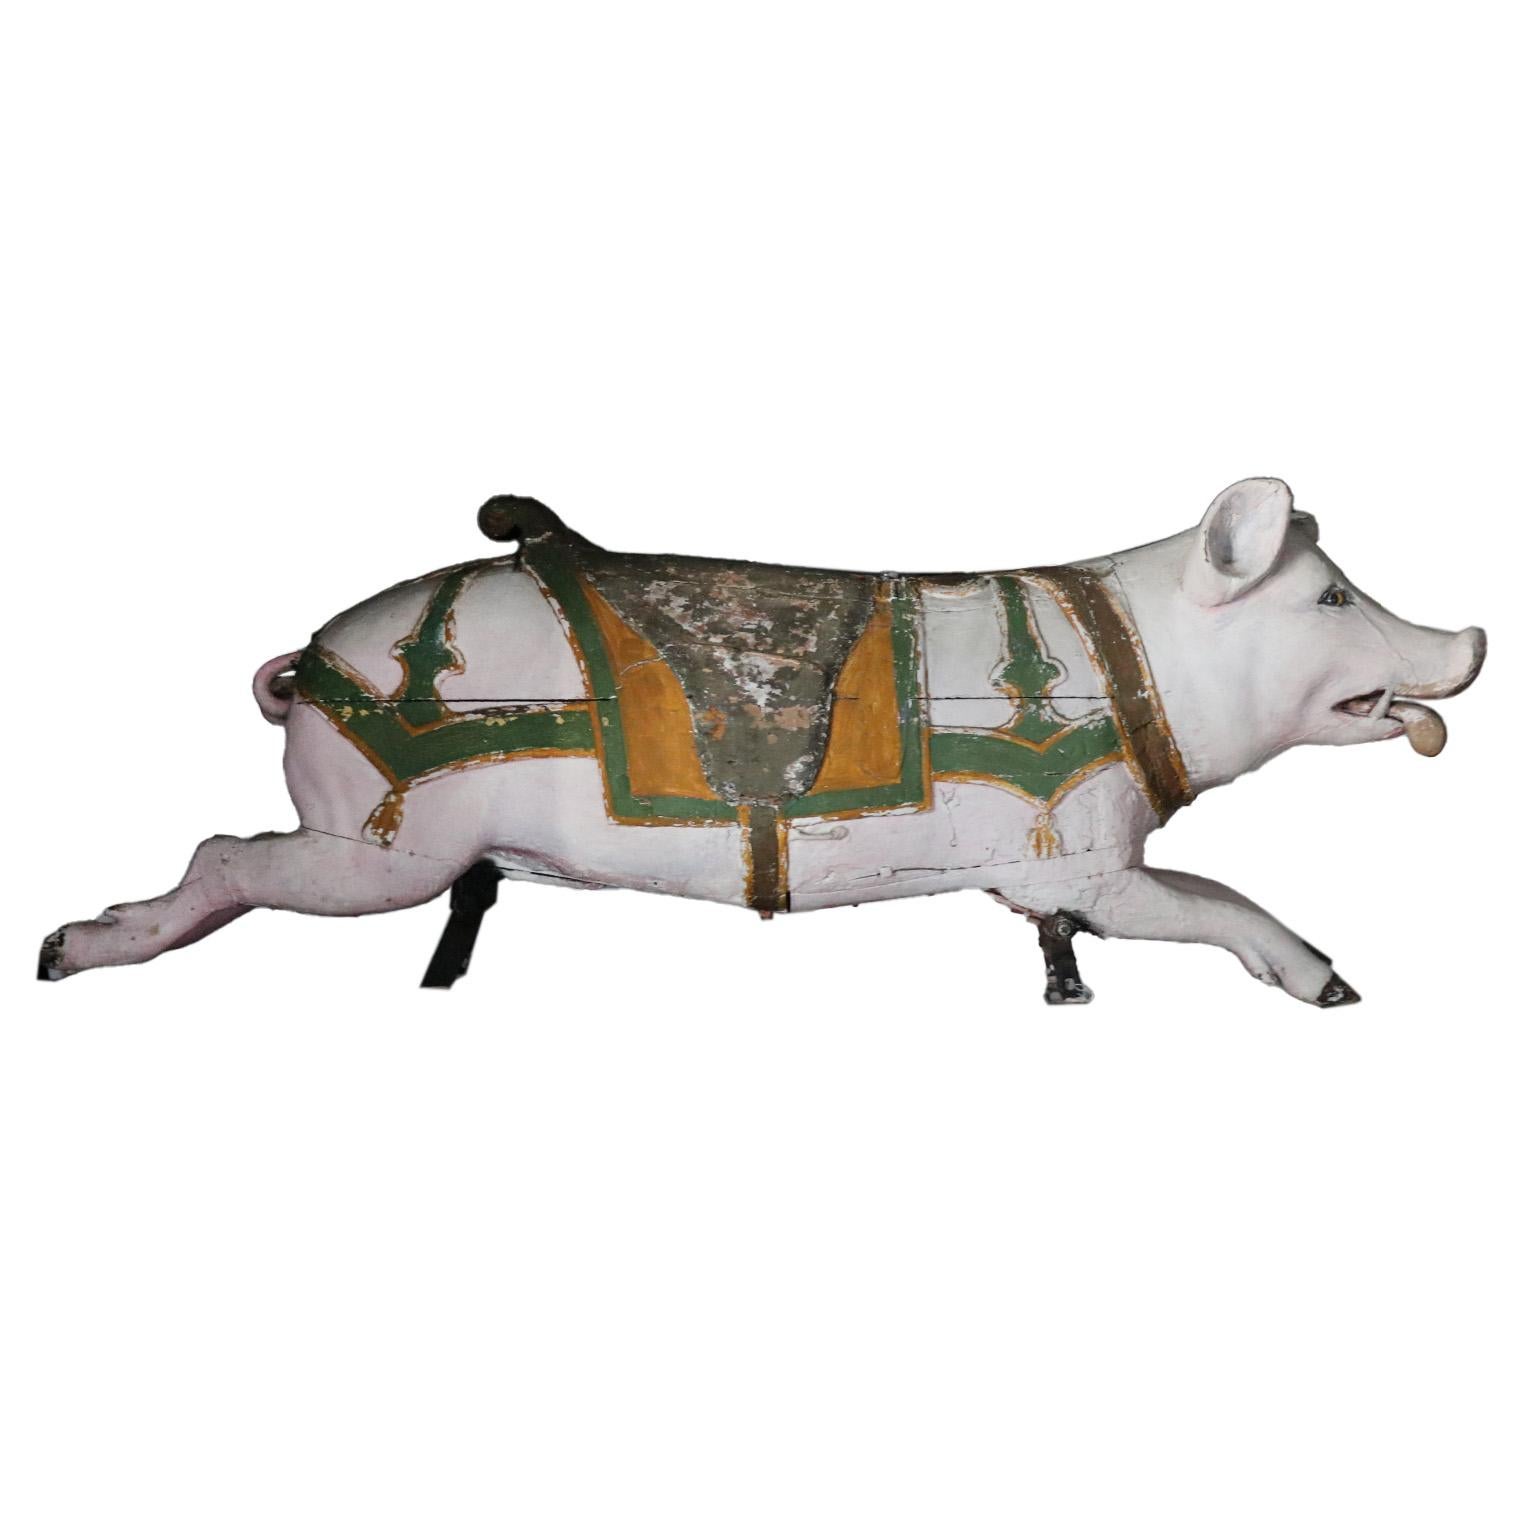 A vintage wooden pig that was once part of a carousel.